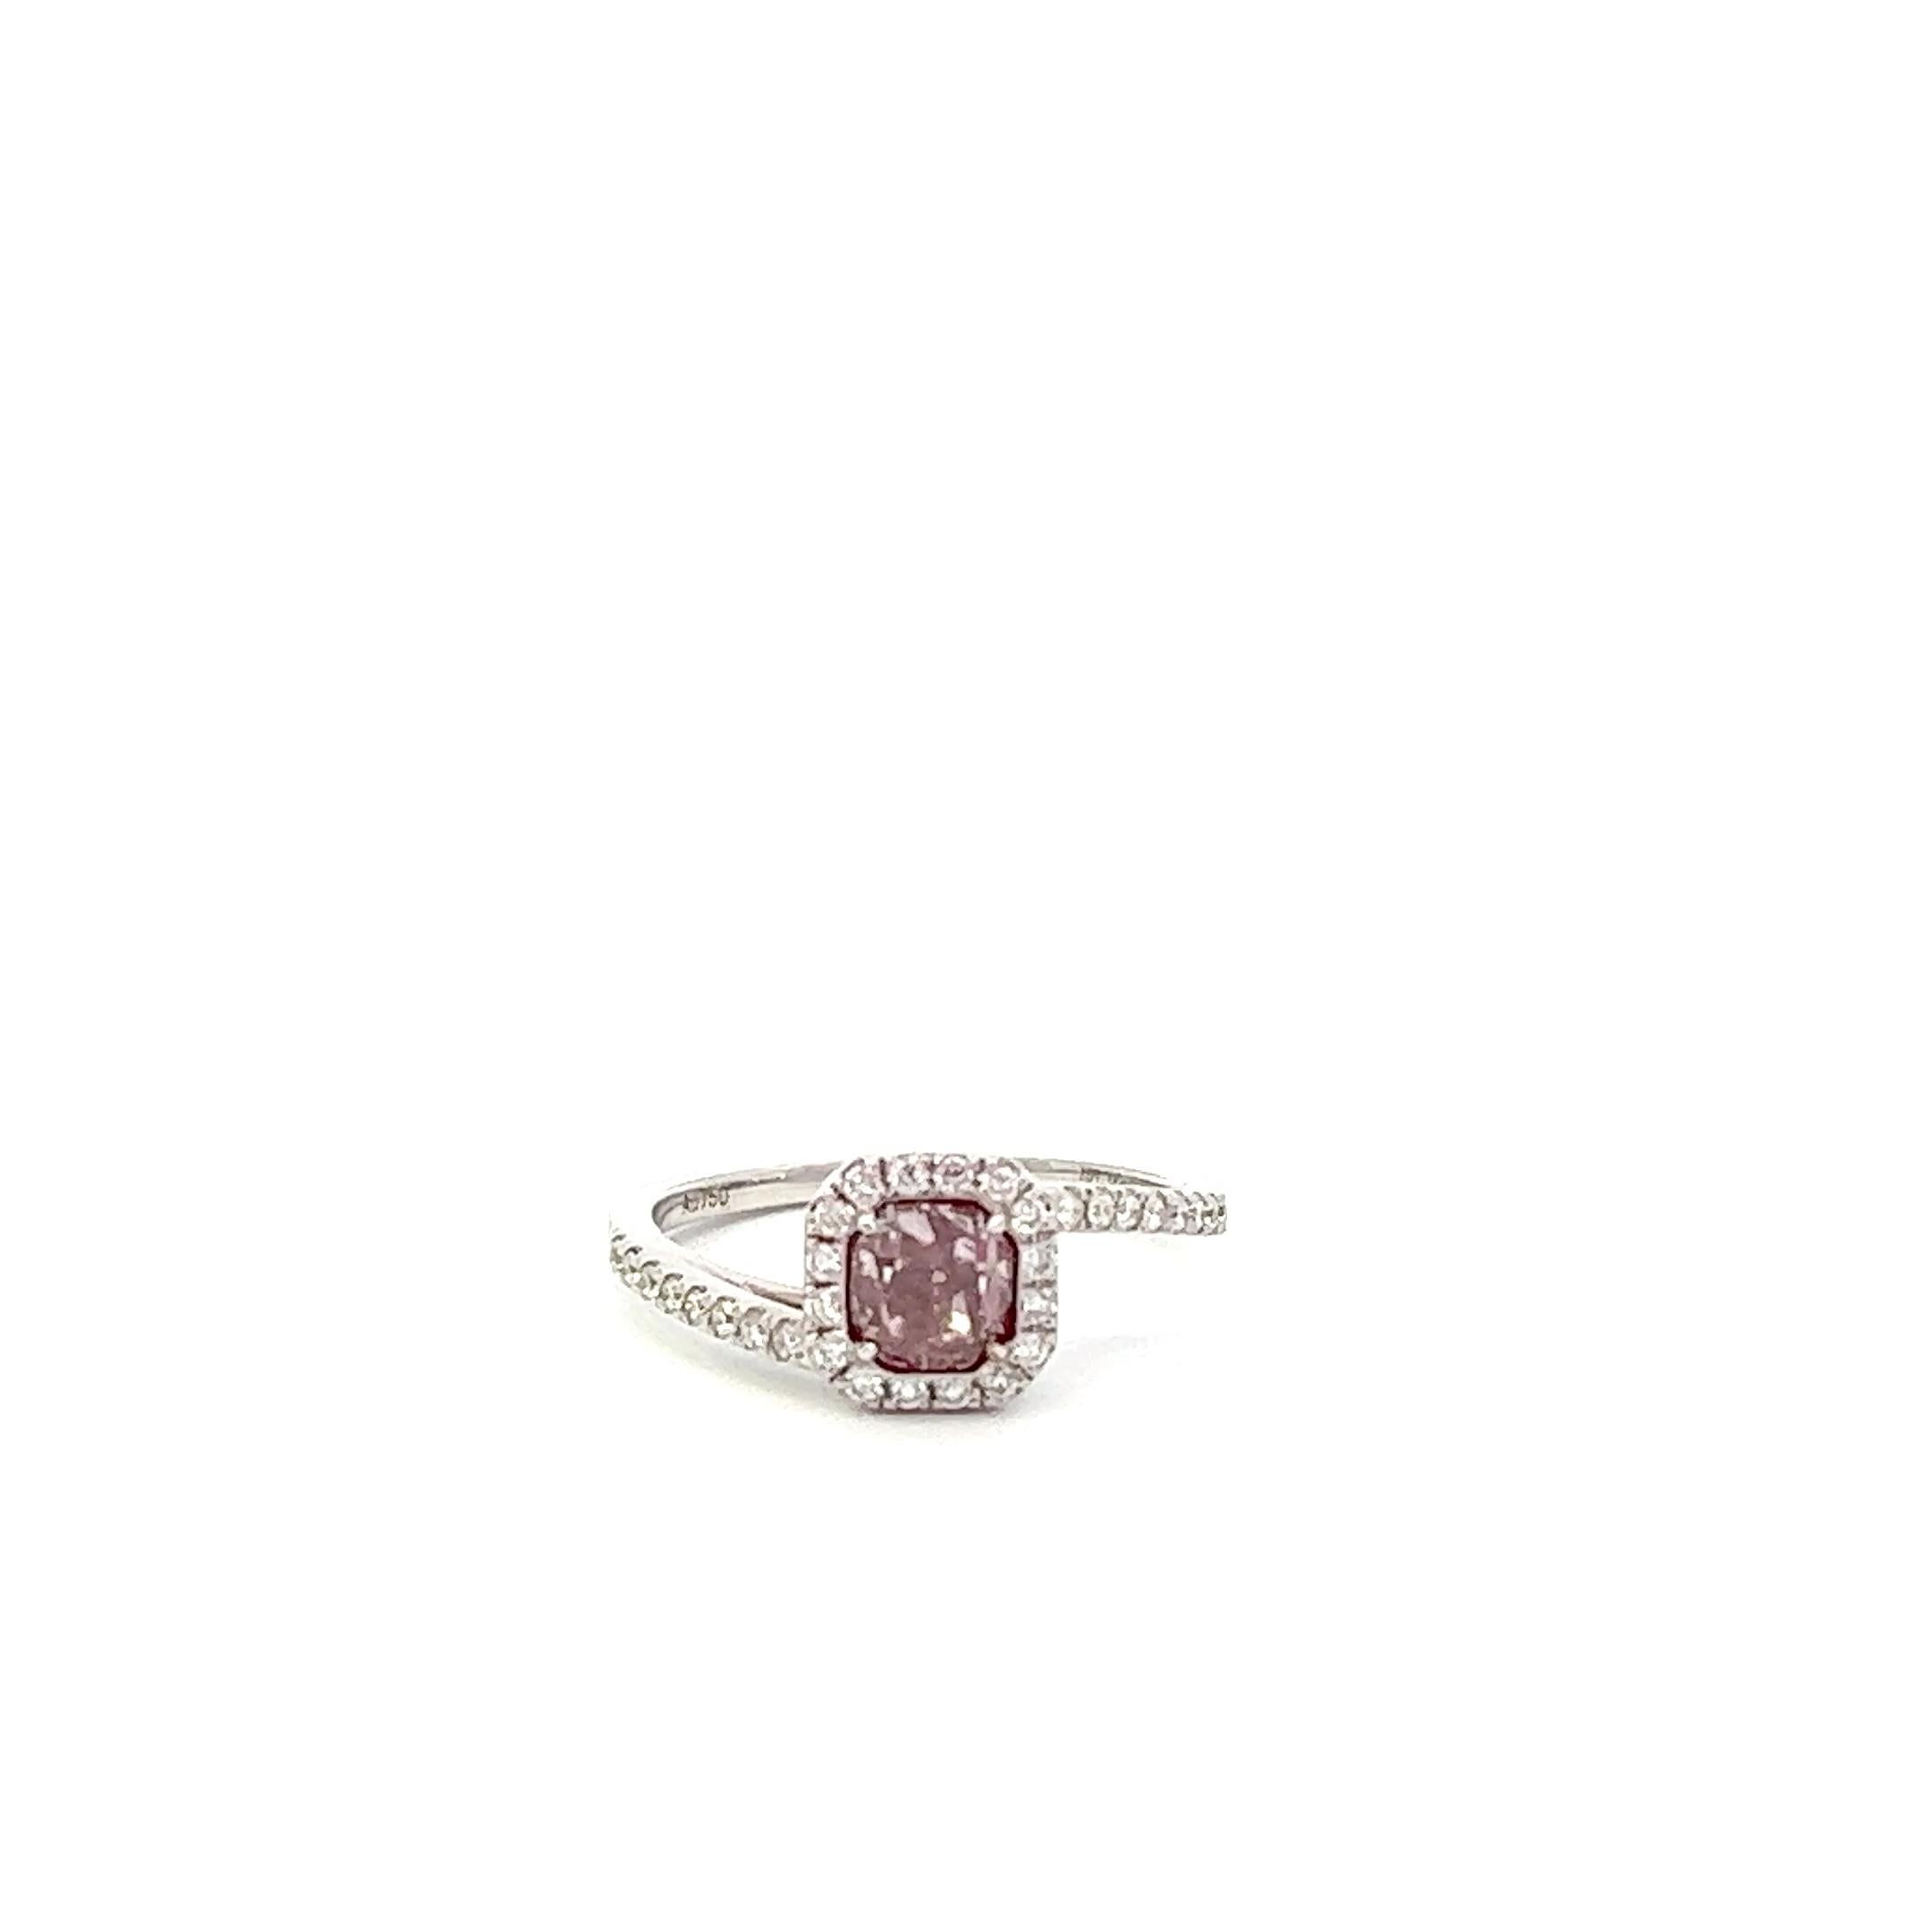 Center: 1.00ct Fancy Pinkish Brown Round-Cornered Square I1 GIA# 5166969718
Setting: 18k White Gold 0.22ctw Accent Diamonds

An extremely rare and stunning natural pink diamond center. Pink Diamonds account for less than 0.01% of all diamonds mined